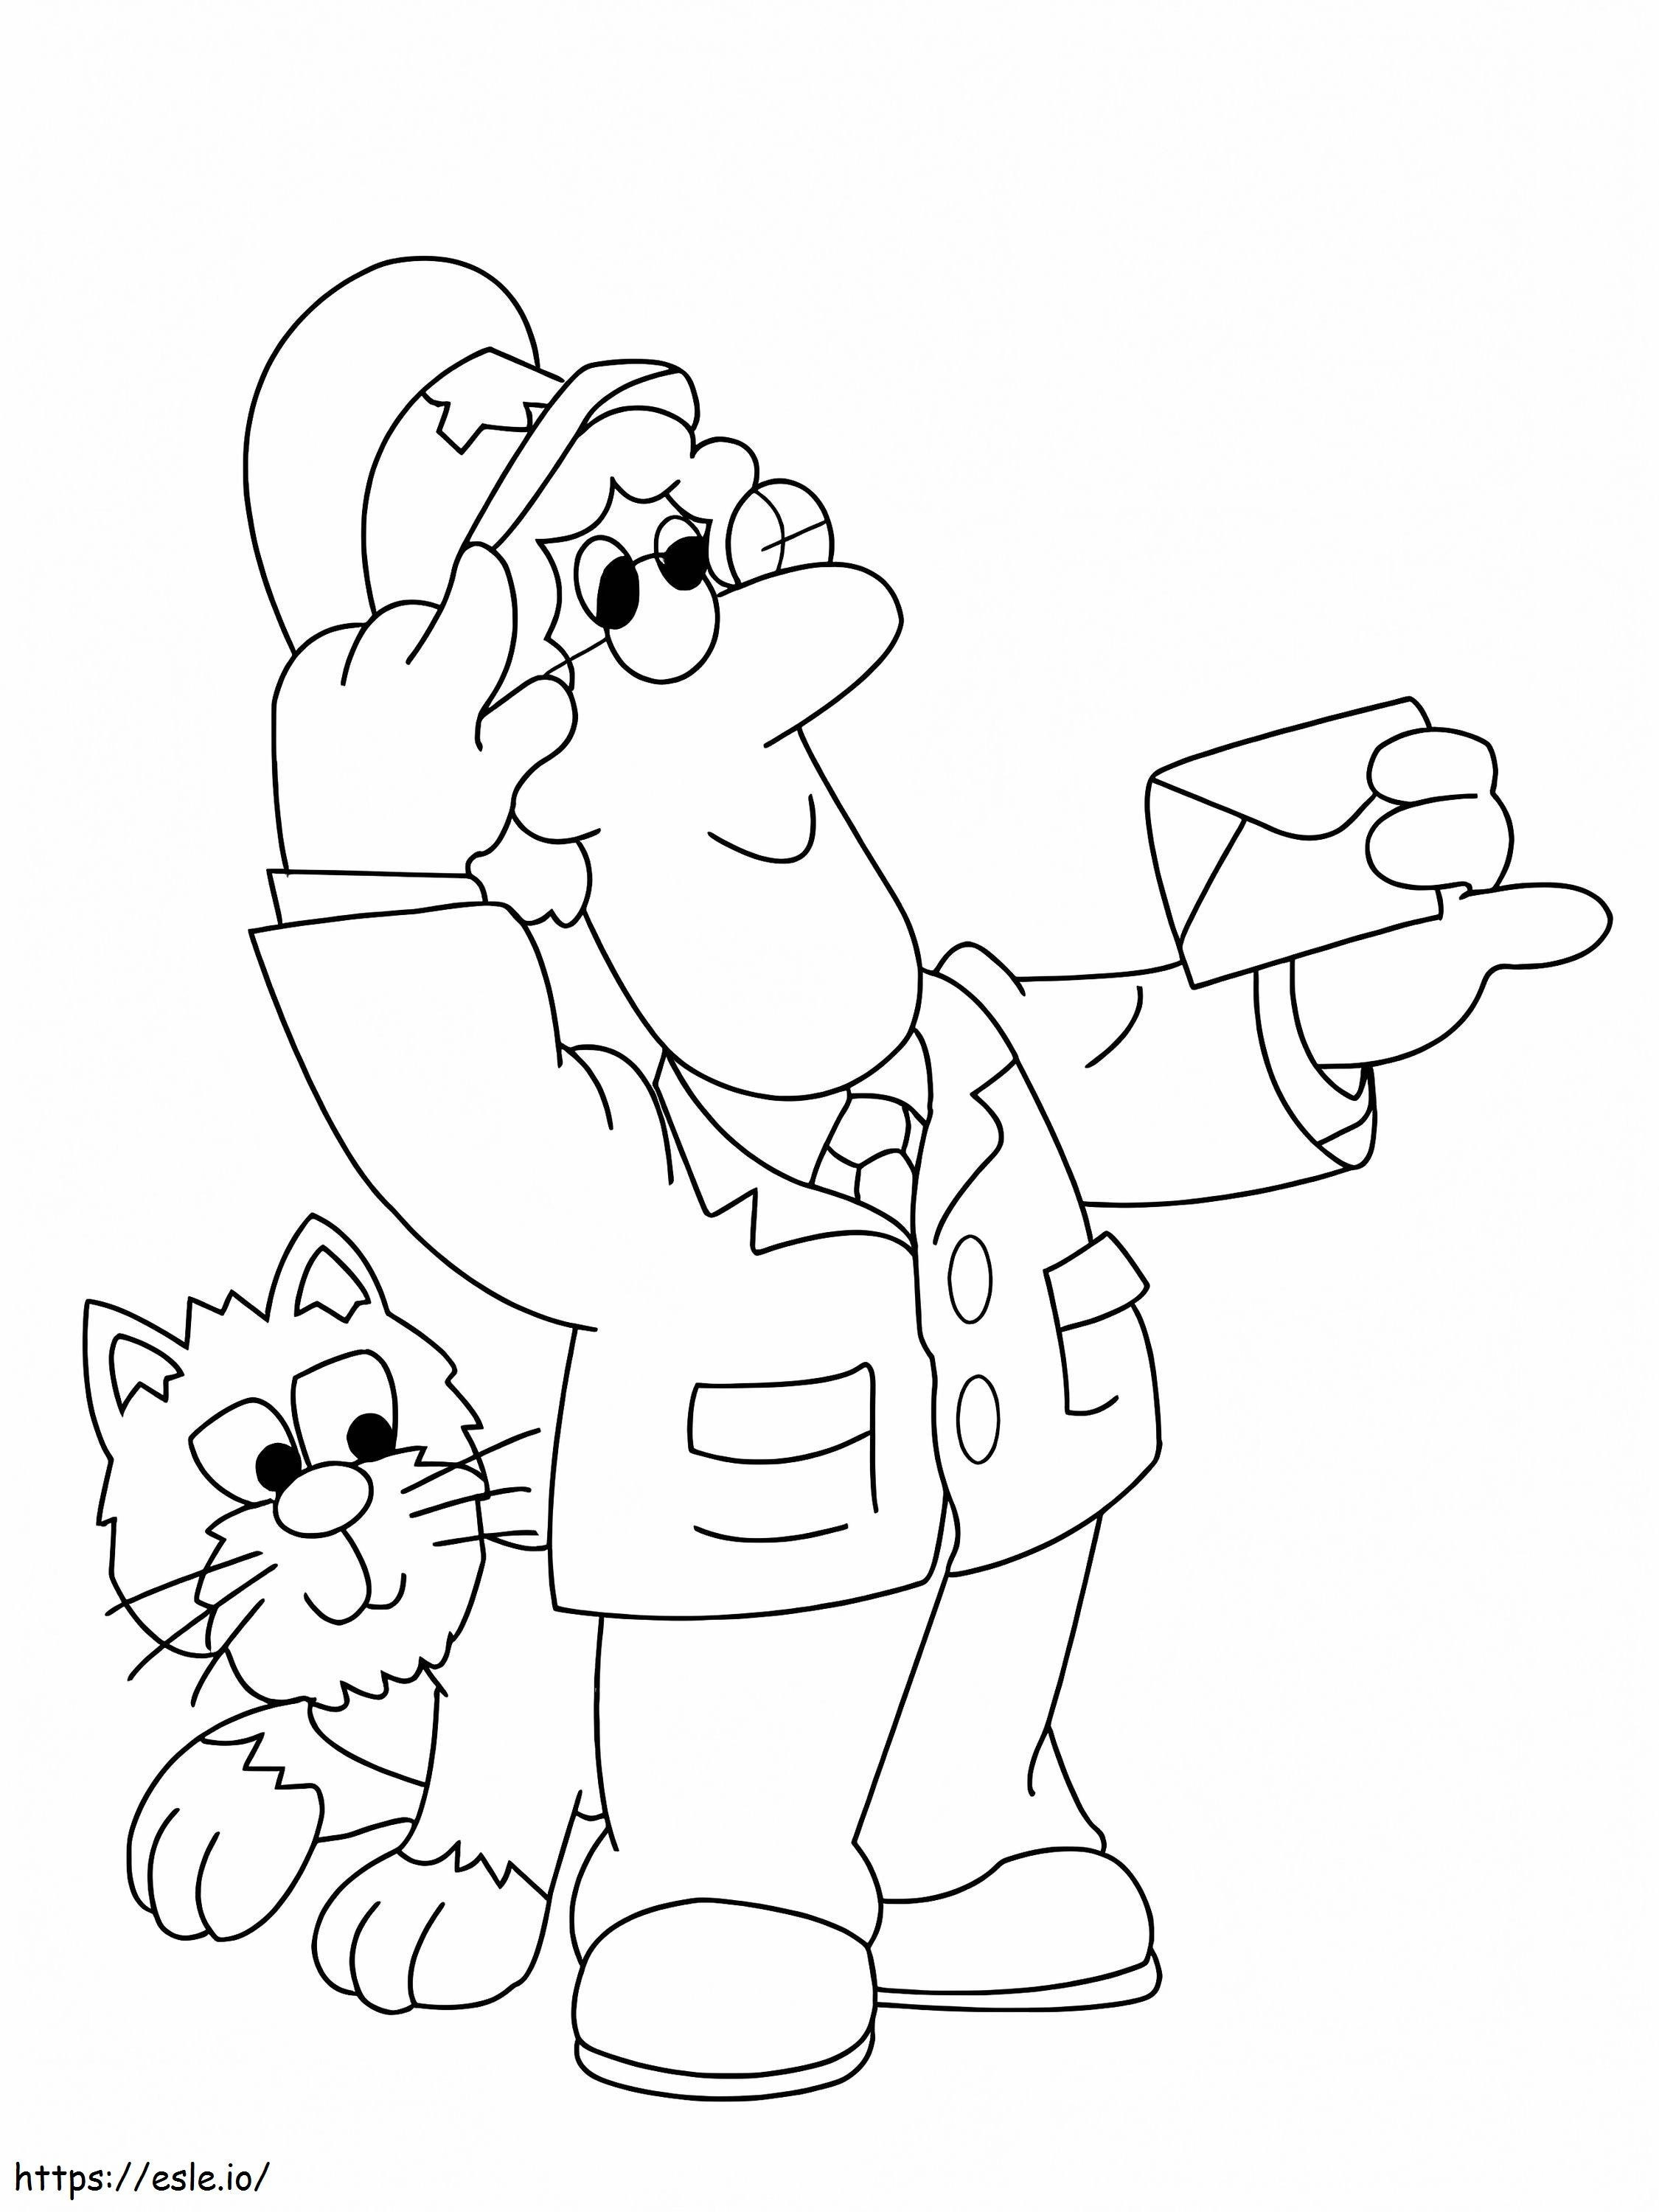 Awesome Postman Pat And Cat coloring page